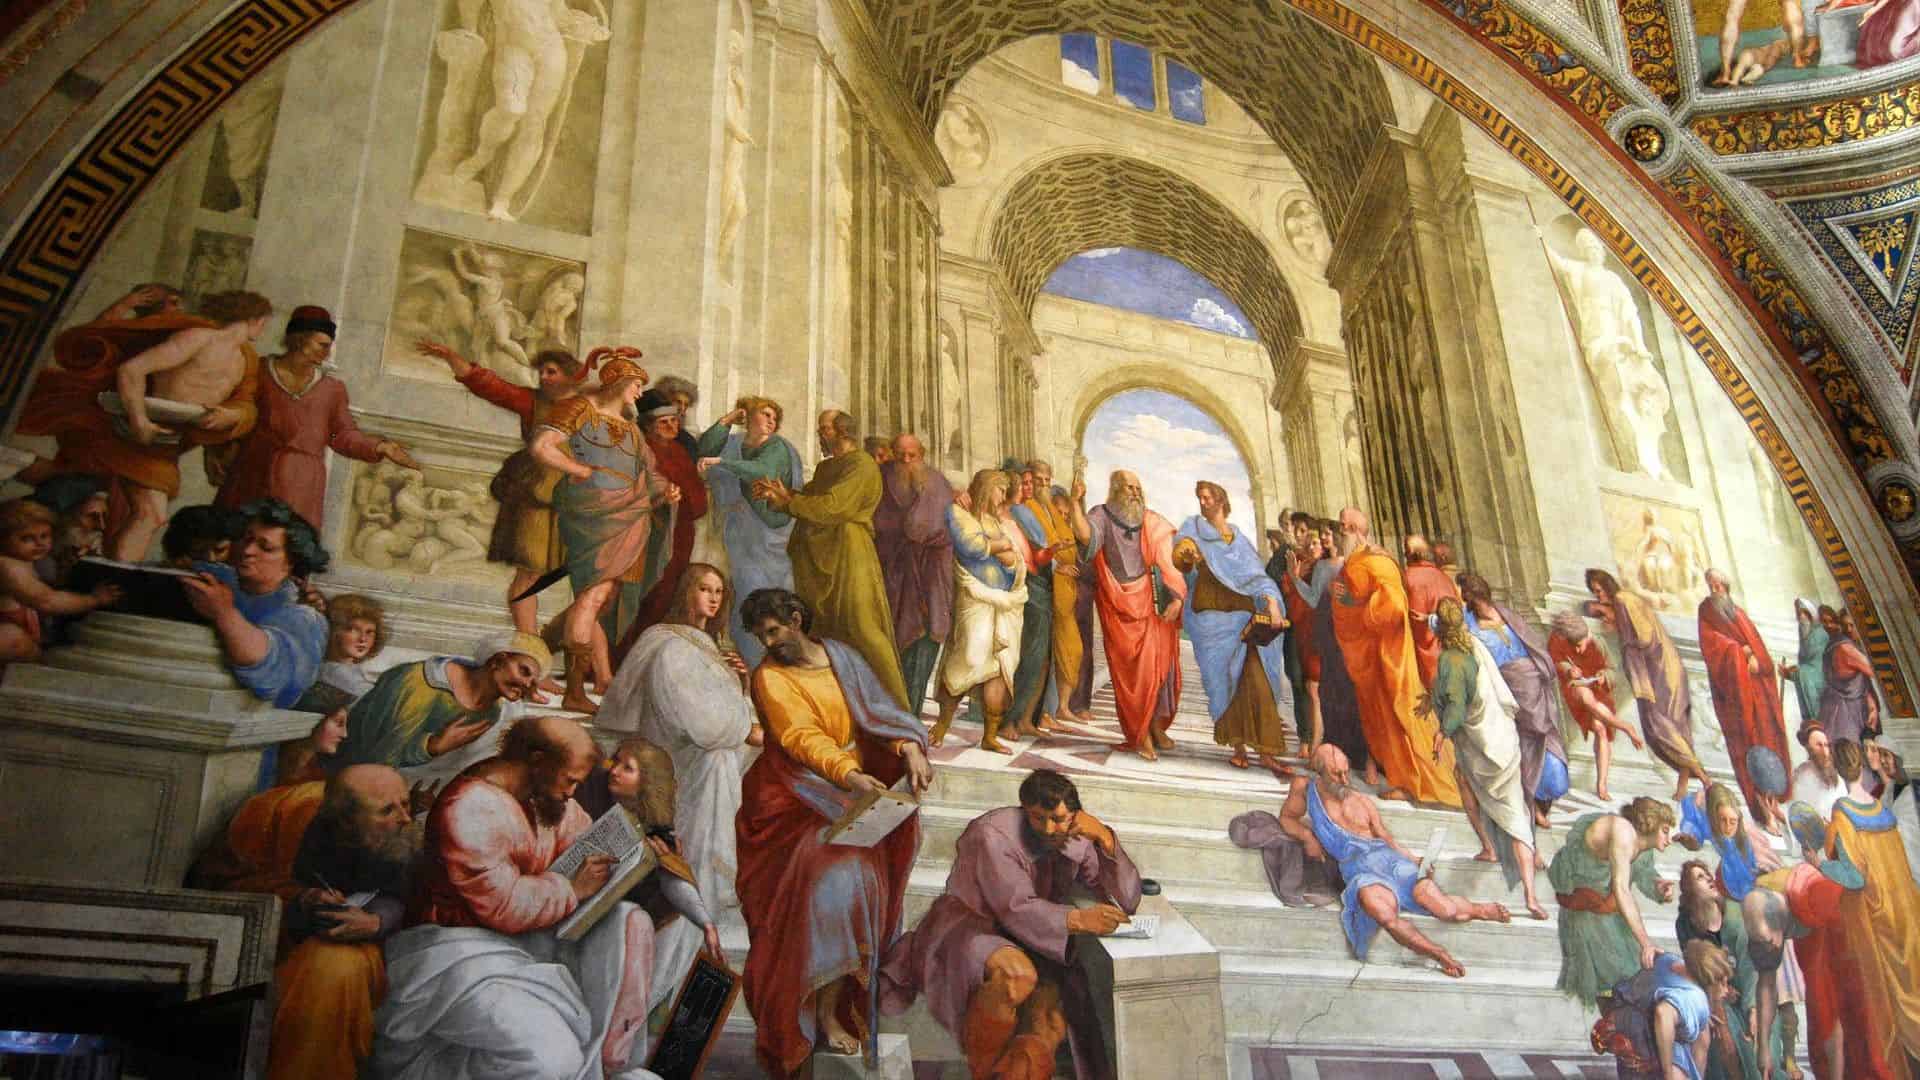 The School of Athens painting in the Raphael Rooms at the Vatican Museums